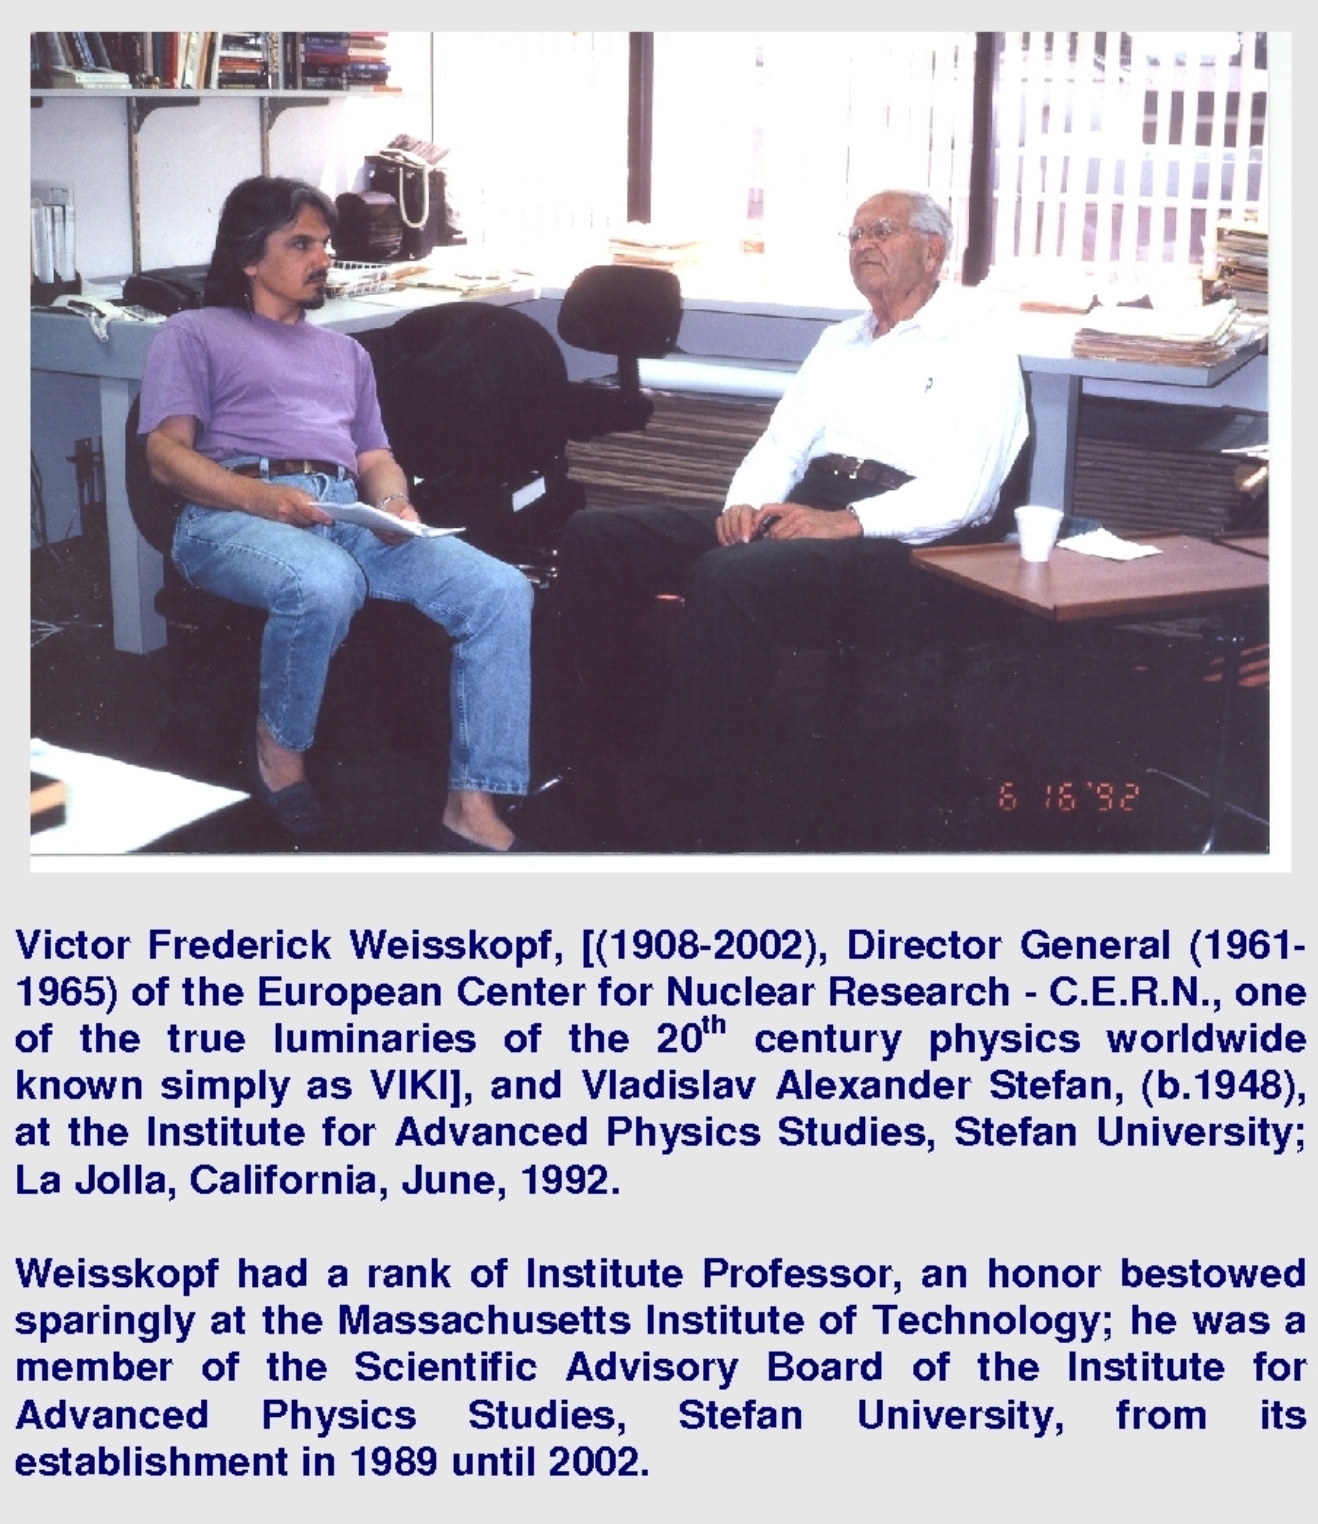 Victor Frederick Weisskopf, [(1908-2002), Director General (1961-1965) of the European Center for Nuclear Research - C.E.R.N., one of the true luminaries of the 20th century physics worldwide known simply as VIKI], and Vladislav Alexander Stefan, (b.1948), at the Institute for Advanced Physics Studies, Stefan University; La Jolla, California, June, 1992. Weisskopf had a rank of Institute Professor, an honor bestowed sparingly at the Massachusetts Institute of Technology; he was a member of the Scientific Advisory Board of the Institute for Advanced Physics Studies, Stefan University, from its establishment in 1989 until 2002.